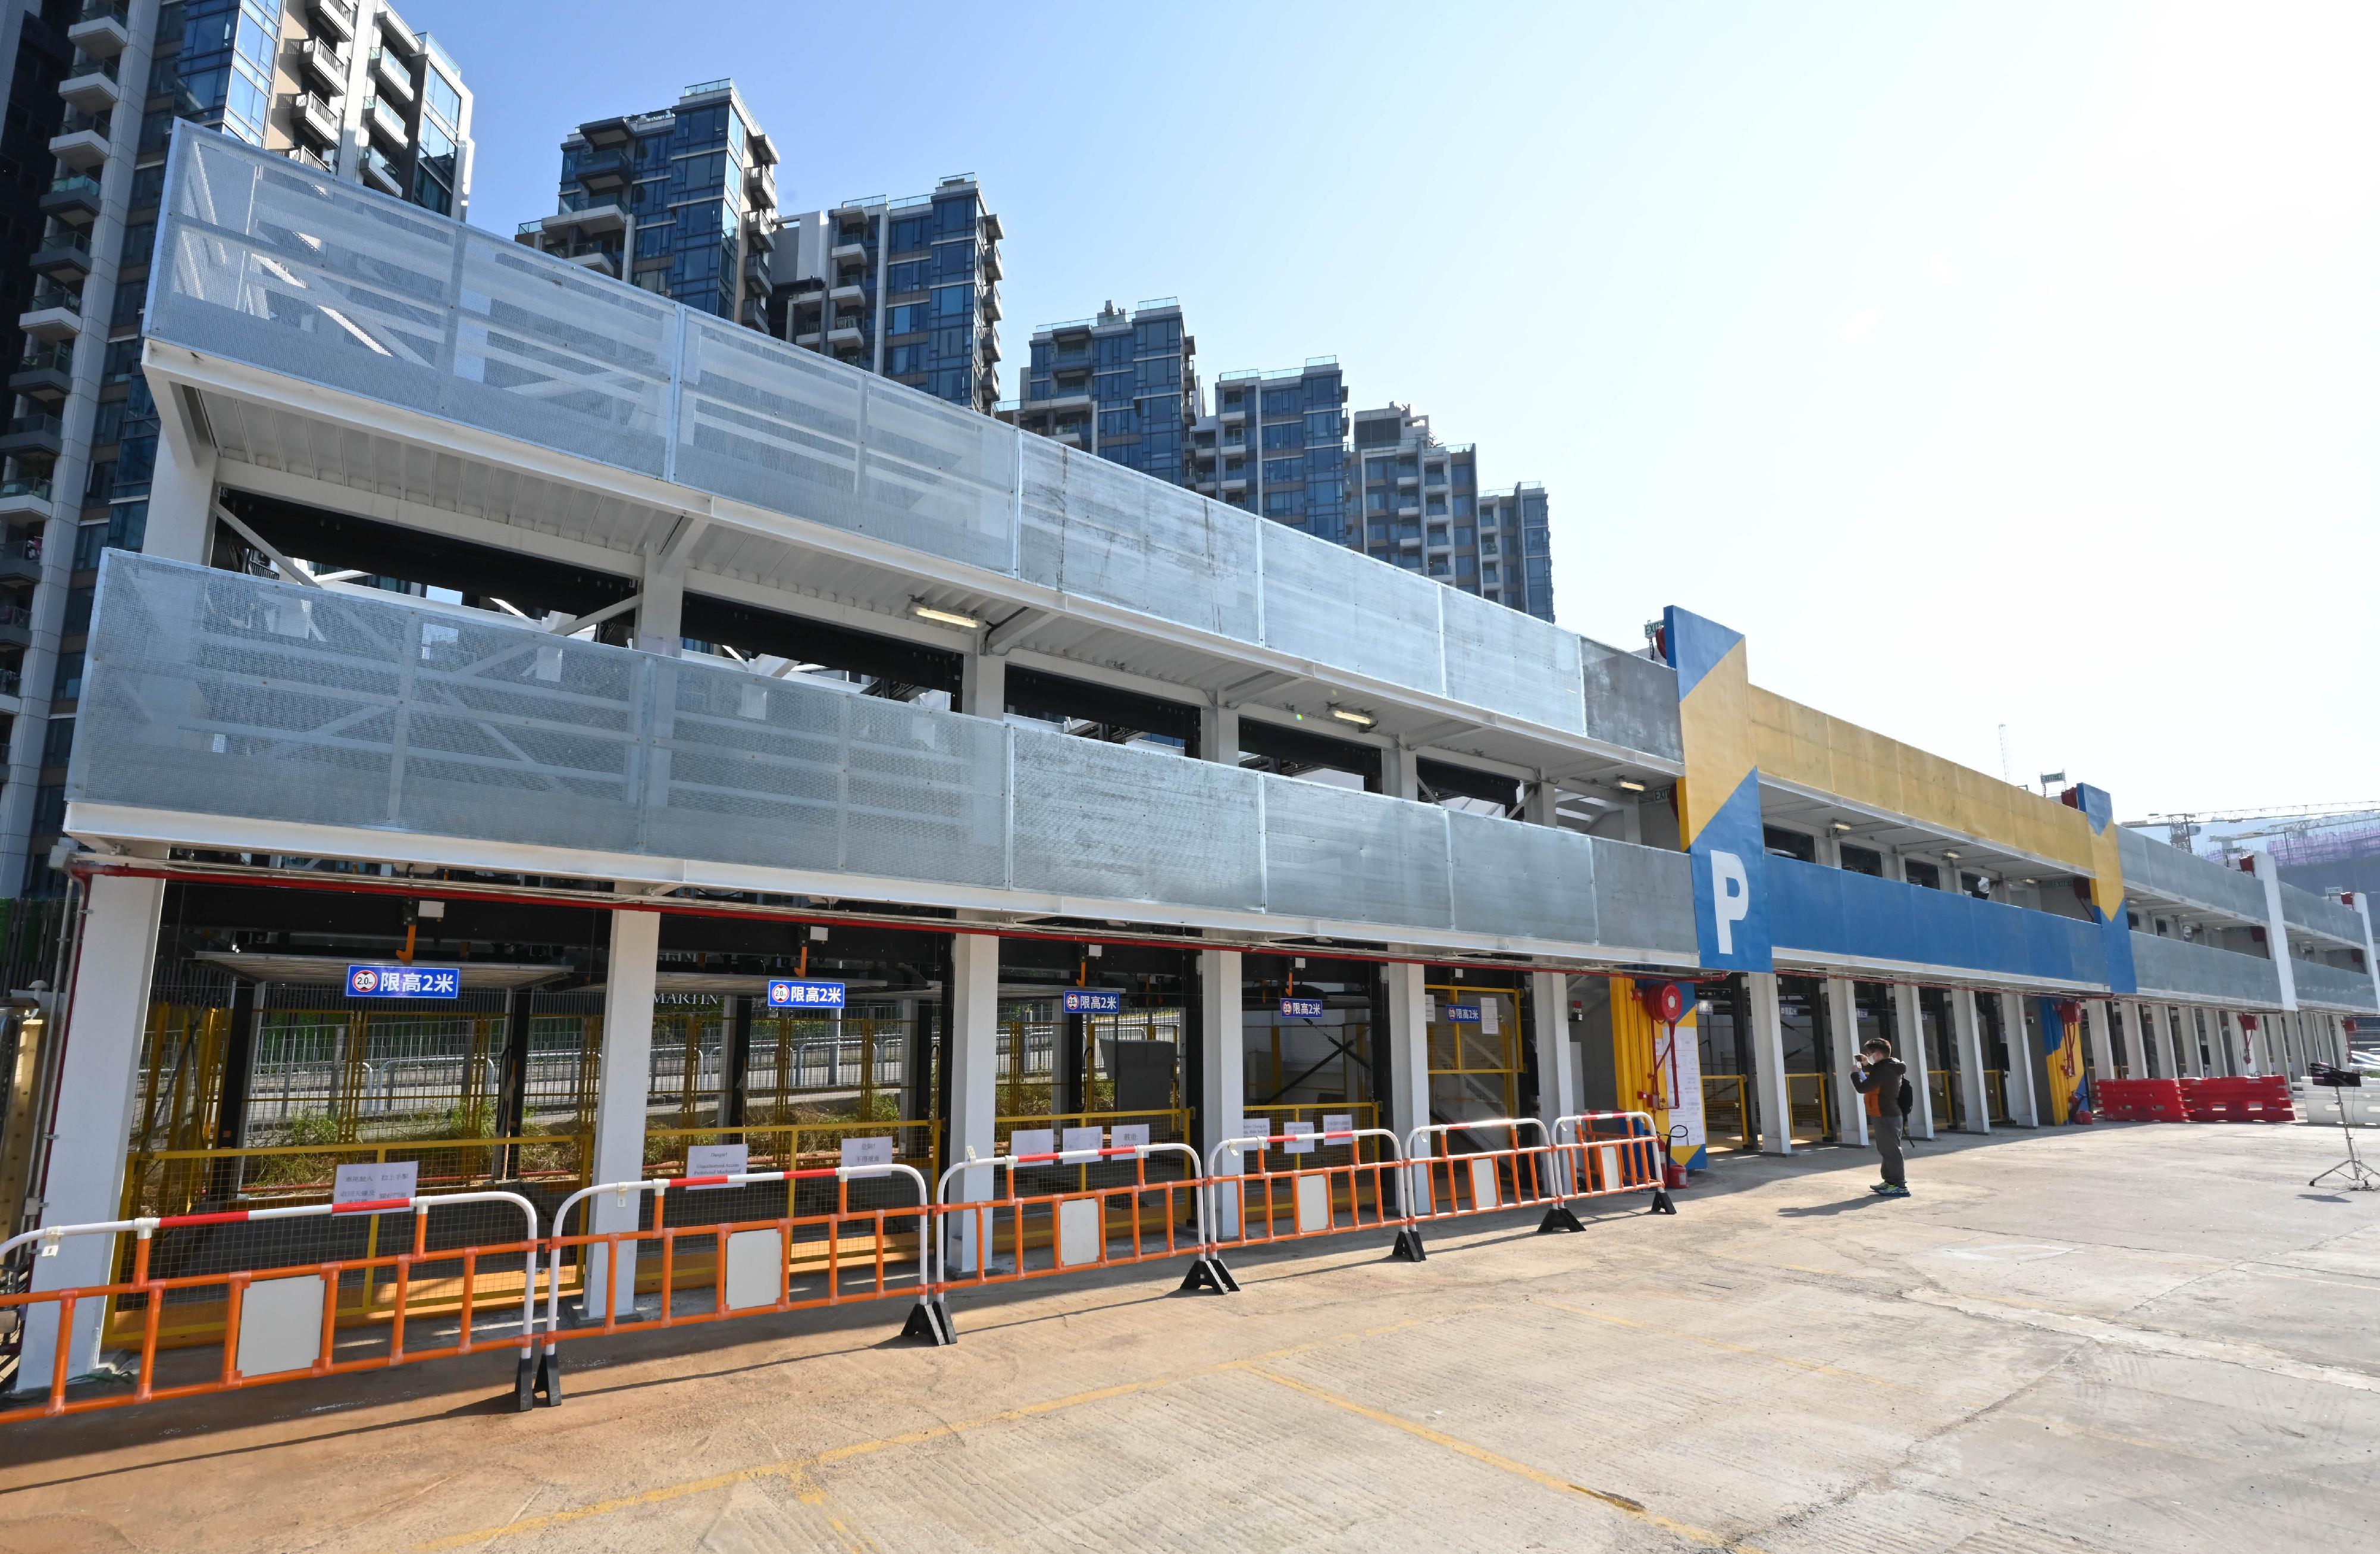 The automated parking system in a short-term tenancy (STT) car park located at Fo Shing Road, Pak Shek Kok, Tai Po, will commence operation tomorrow (December 31). The tenant has adopted four modules of a puzzle stacking system to provide 52 automated parking spaces out of a total of about 250 parking spaces in the STT site.